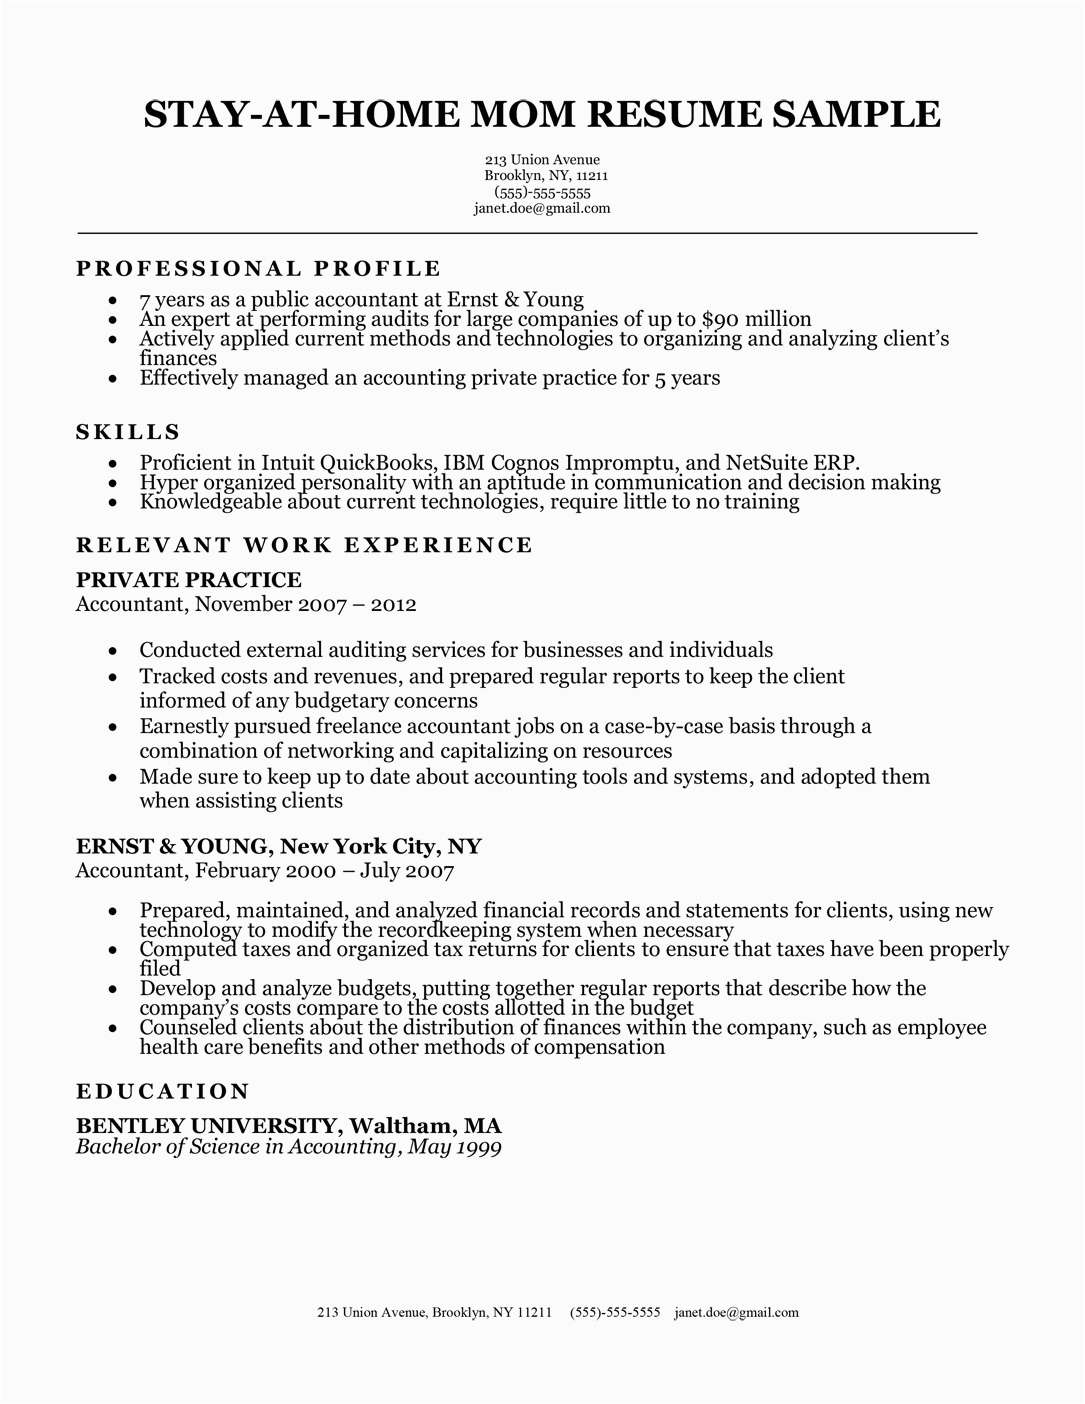 Sample Resume Cover Letter for Stay at Home Mom Stay at Home Mom Resume Sample & Writing Tips